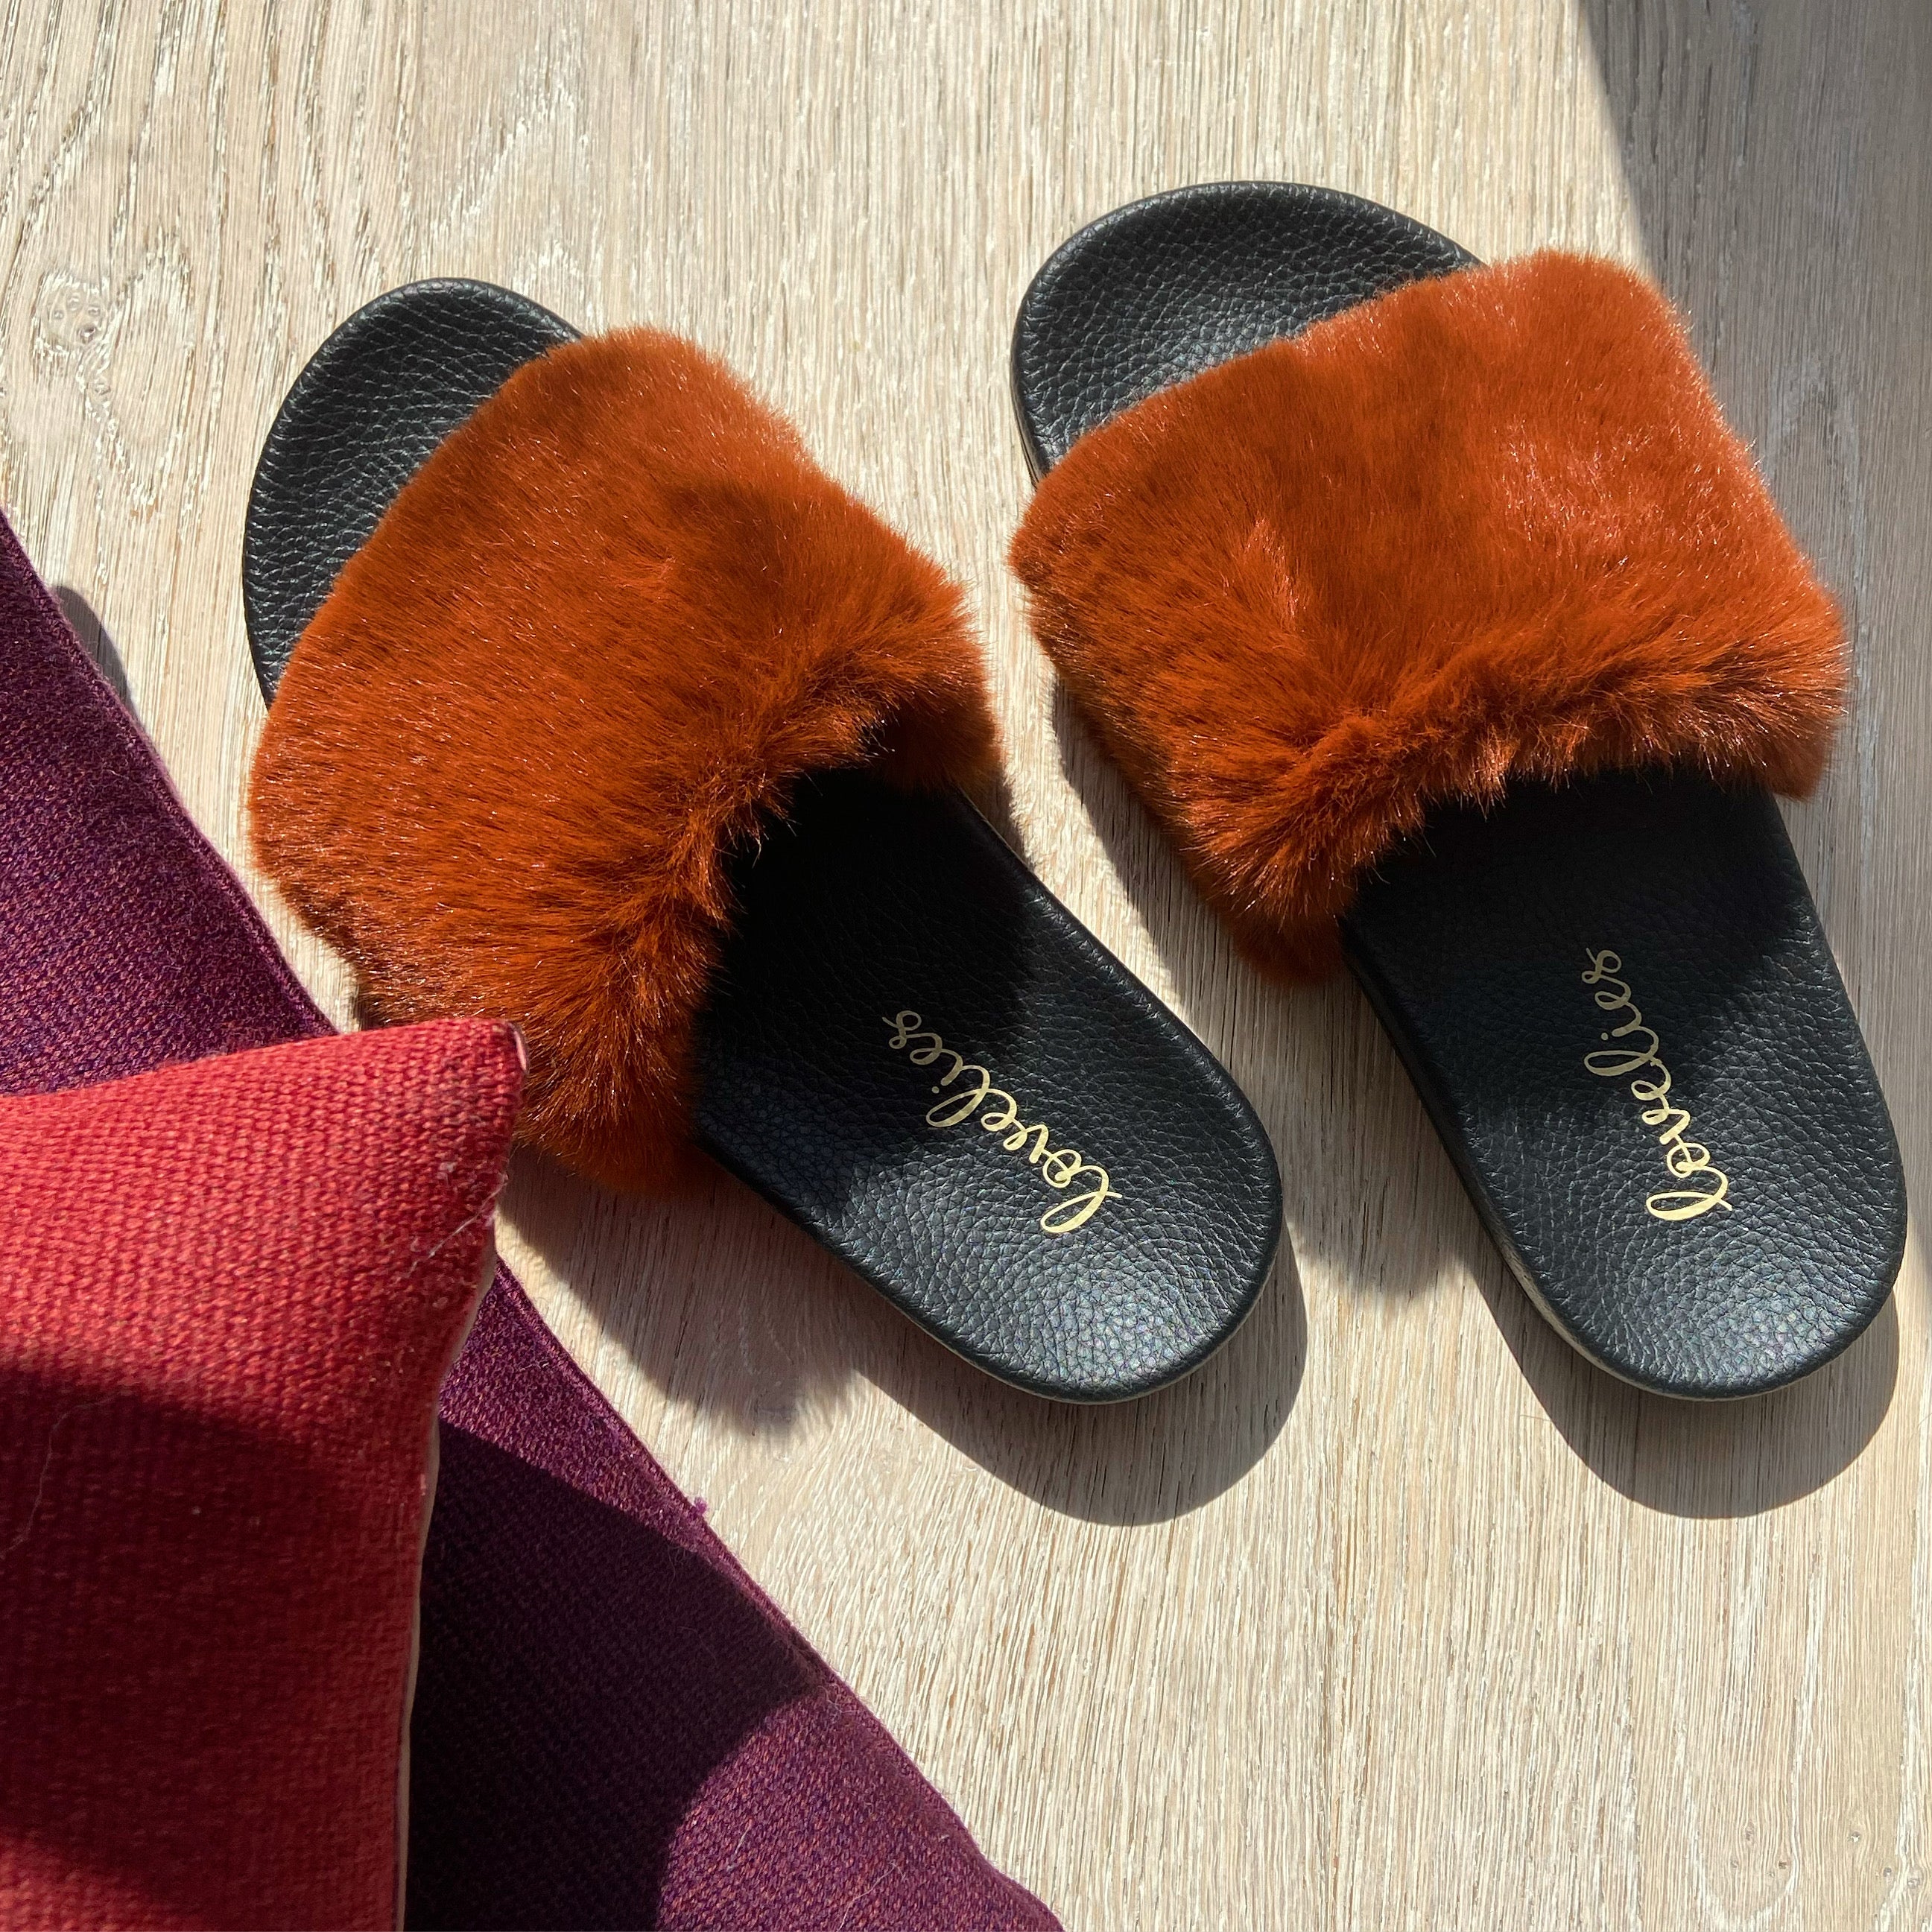 Lovelies Studio Denmark -  Exclusive slides with faux fur. Beautiful and feminine faux fur slides.  The soft rubber sole is light and very comfortable.   We are proud member of 1% for the planet  Enjoy your Lovelies  Material:  Sole : PU   Rubber Lining: Cotton Upper: Faux fur Summer slides in black and rust